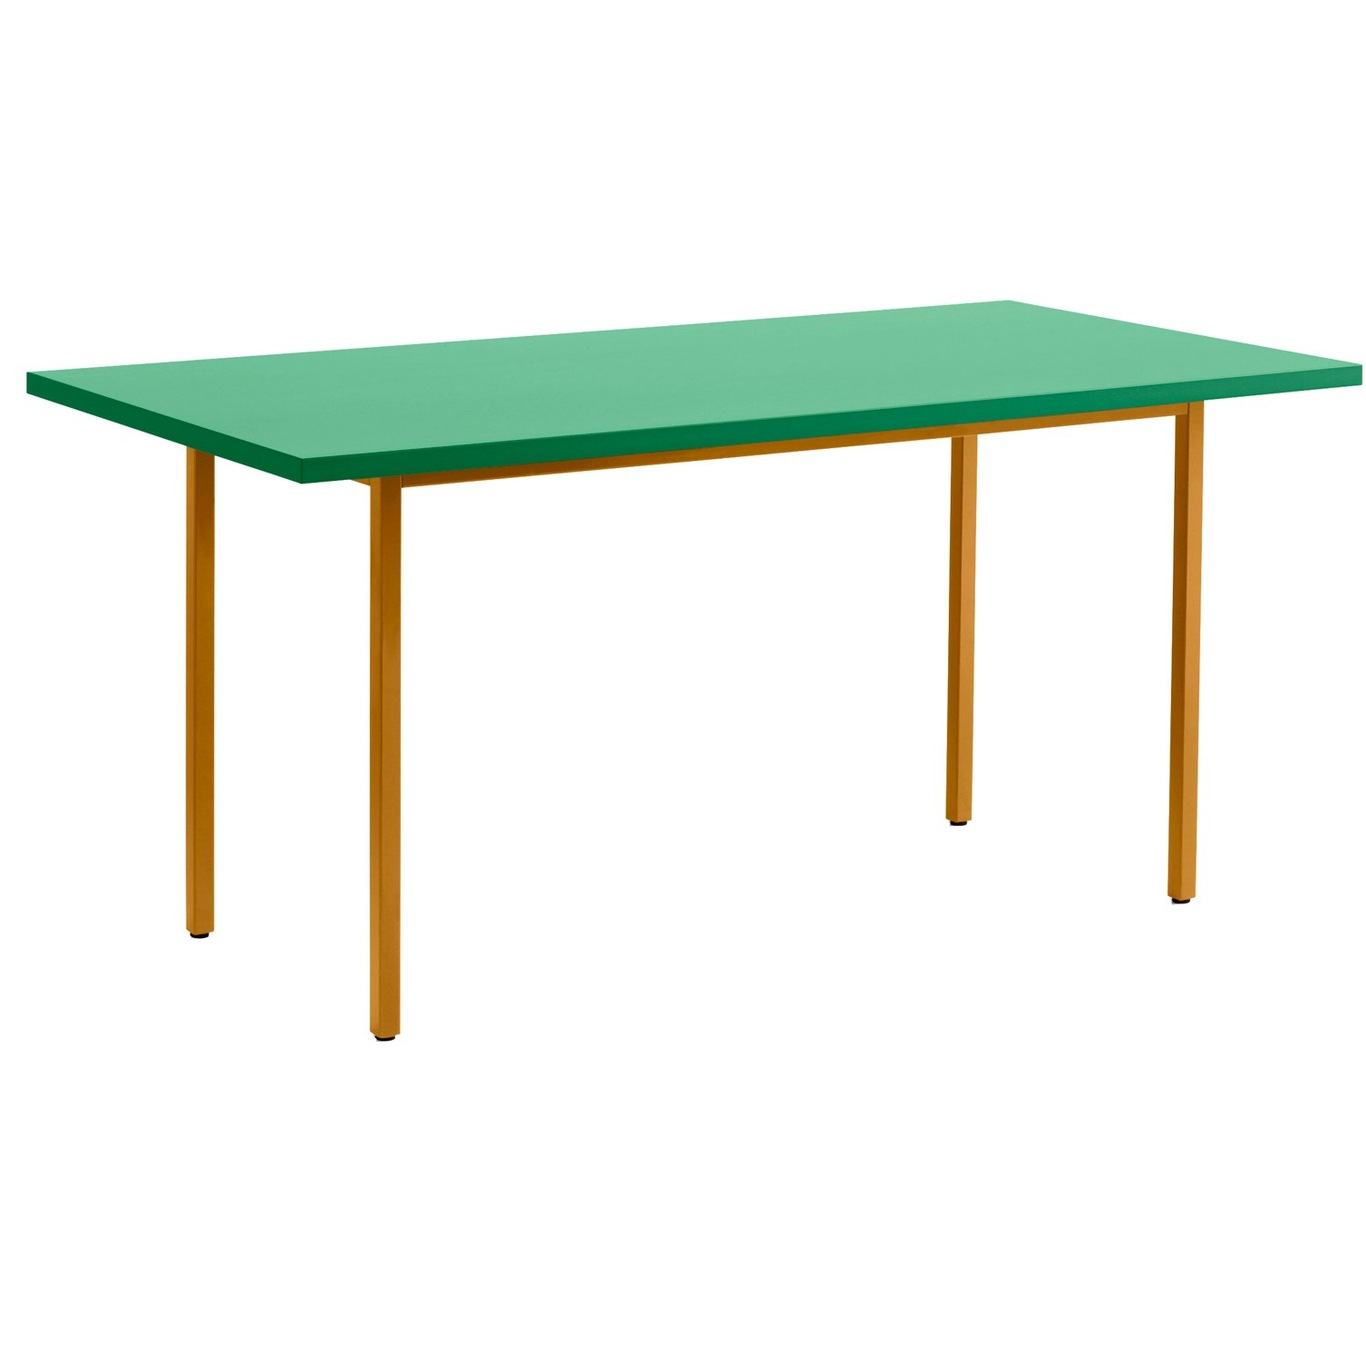 Two-Colour Table 160x82 cm, Ochre / Green Mint